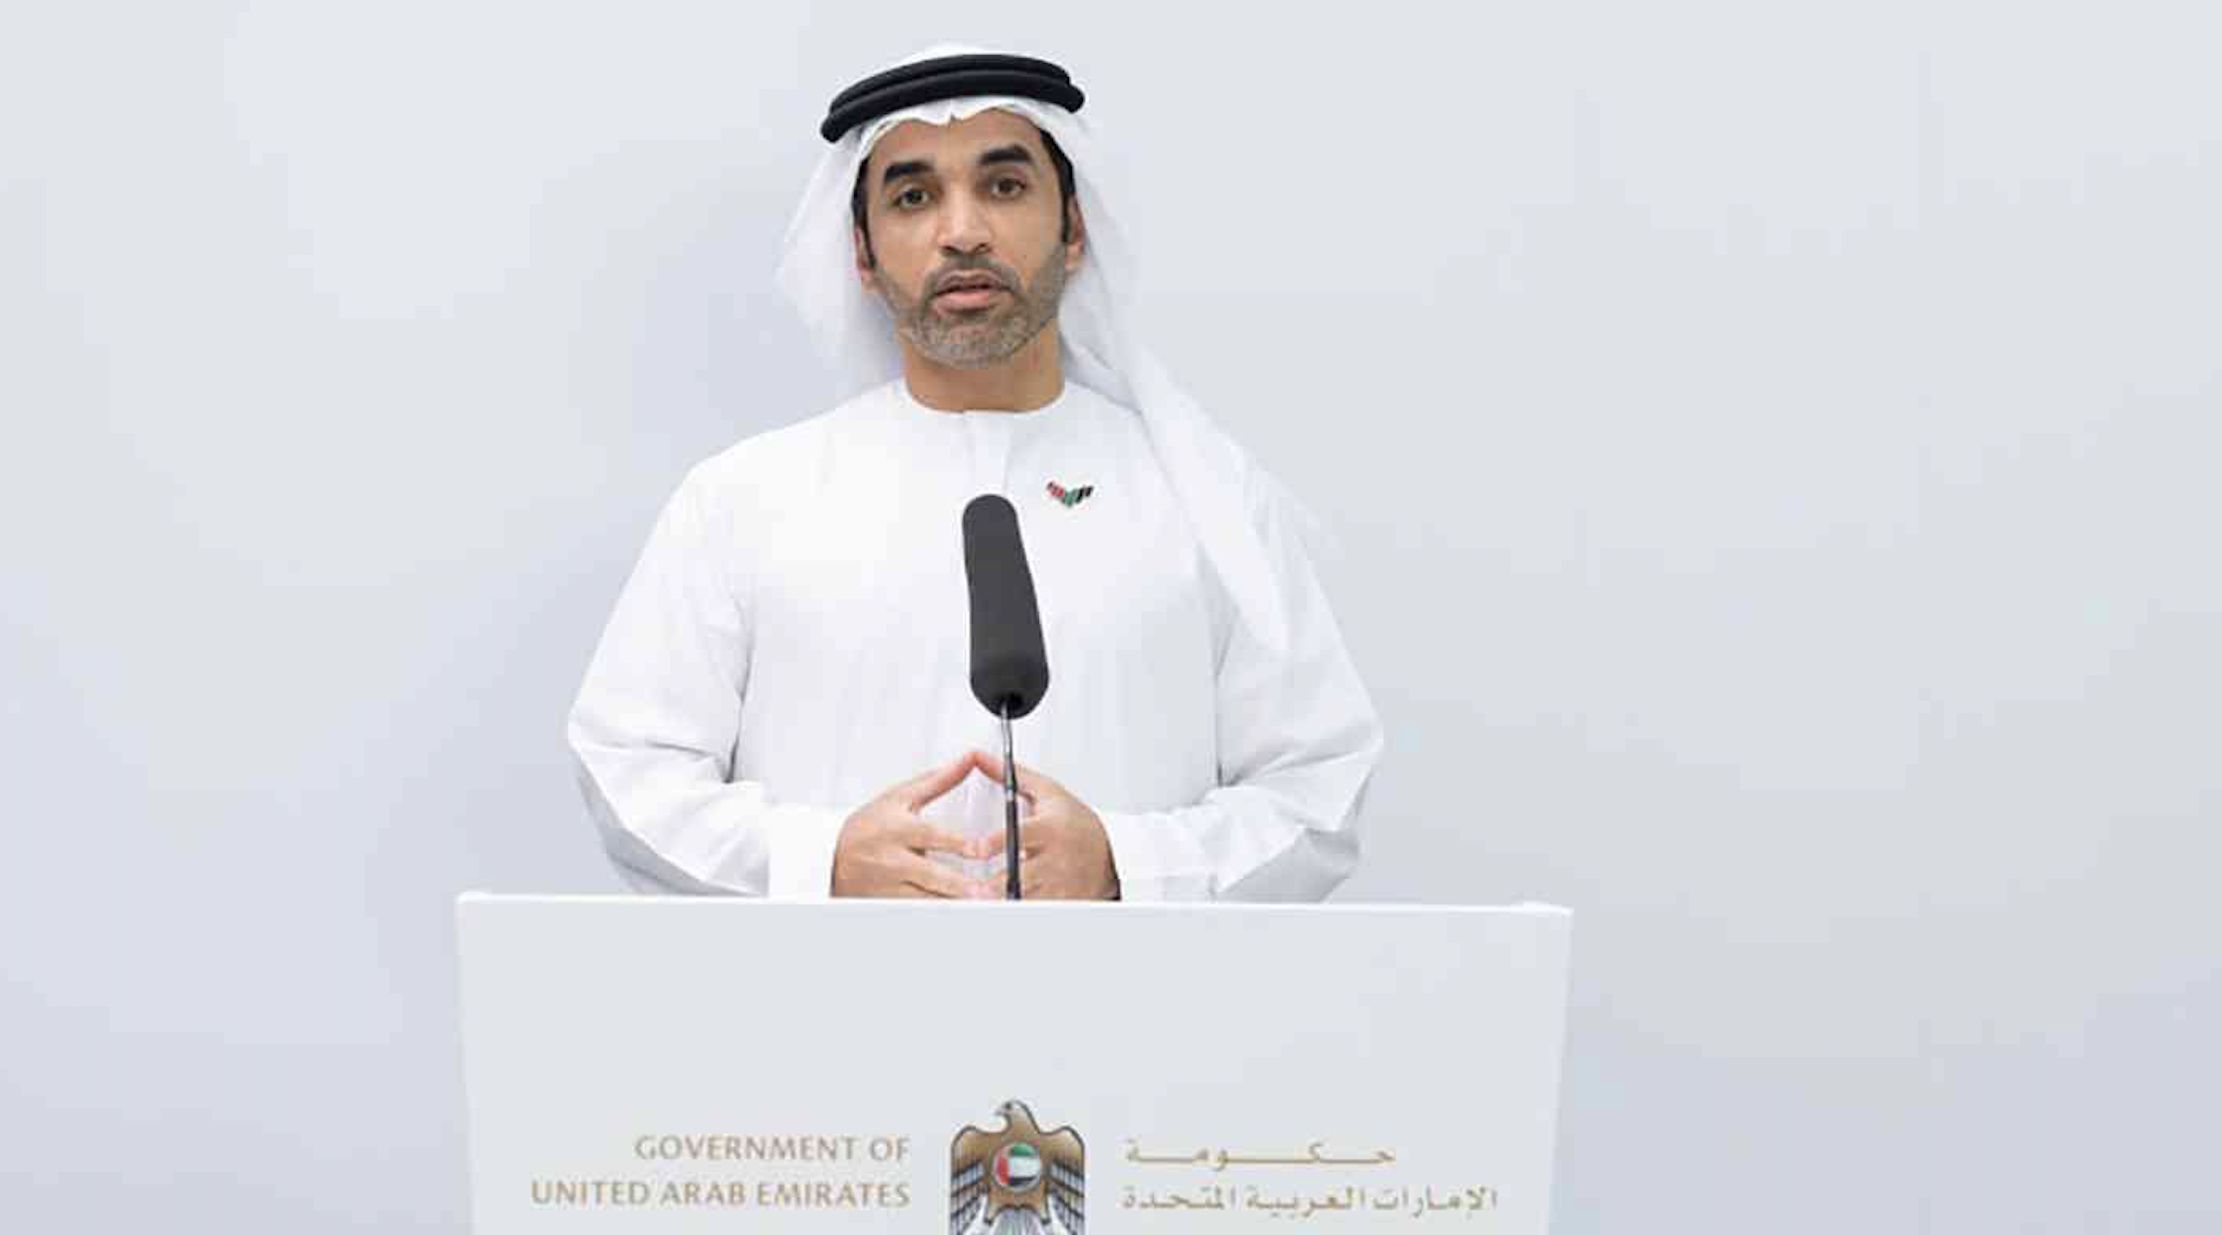 UAE urges public to support in final recovery from COVID-19